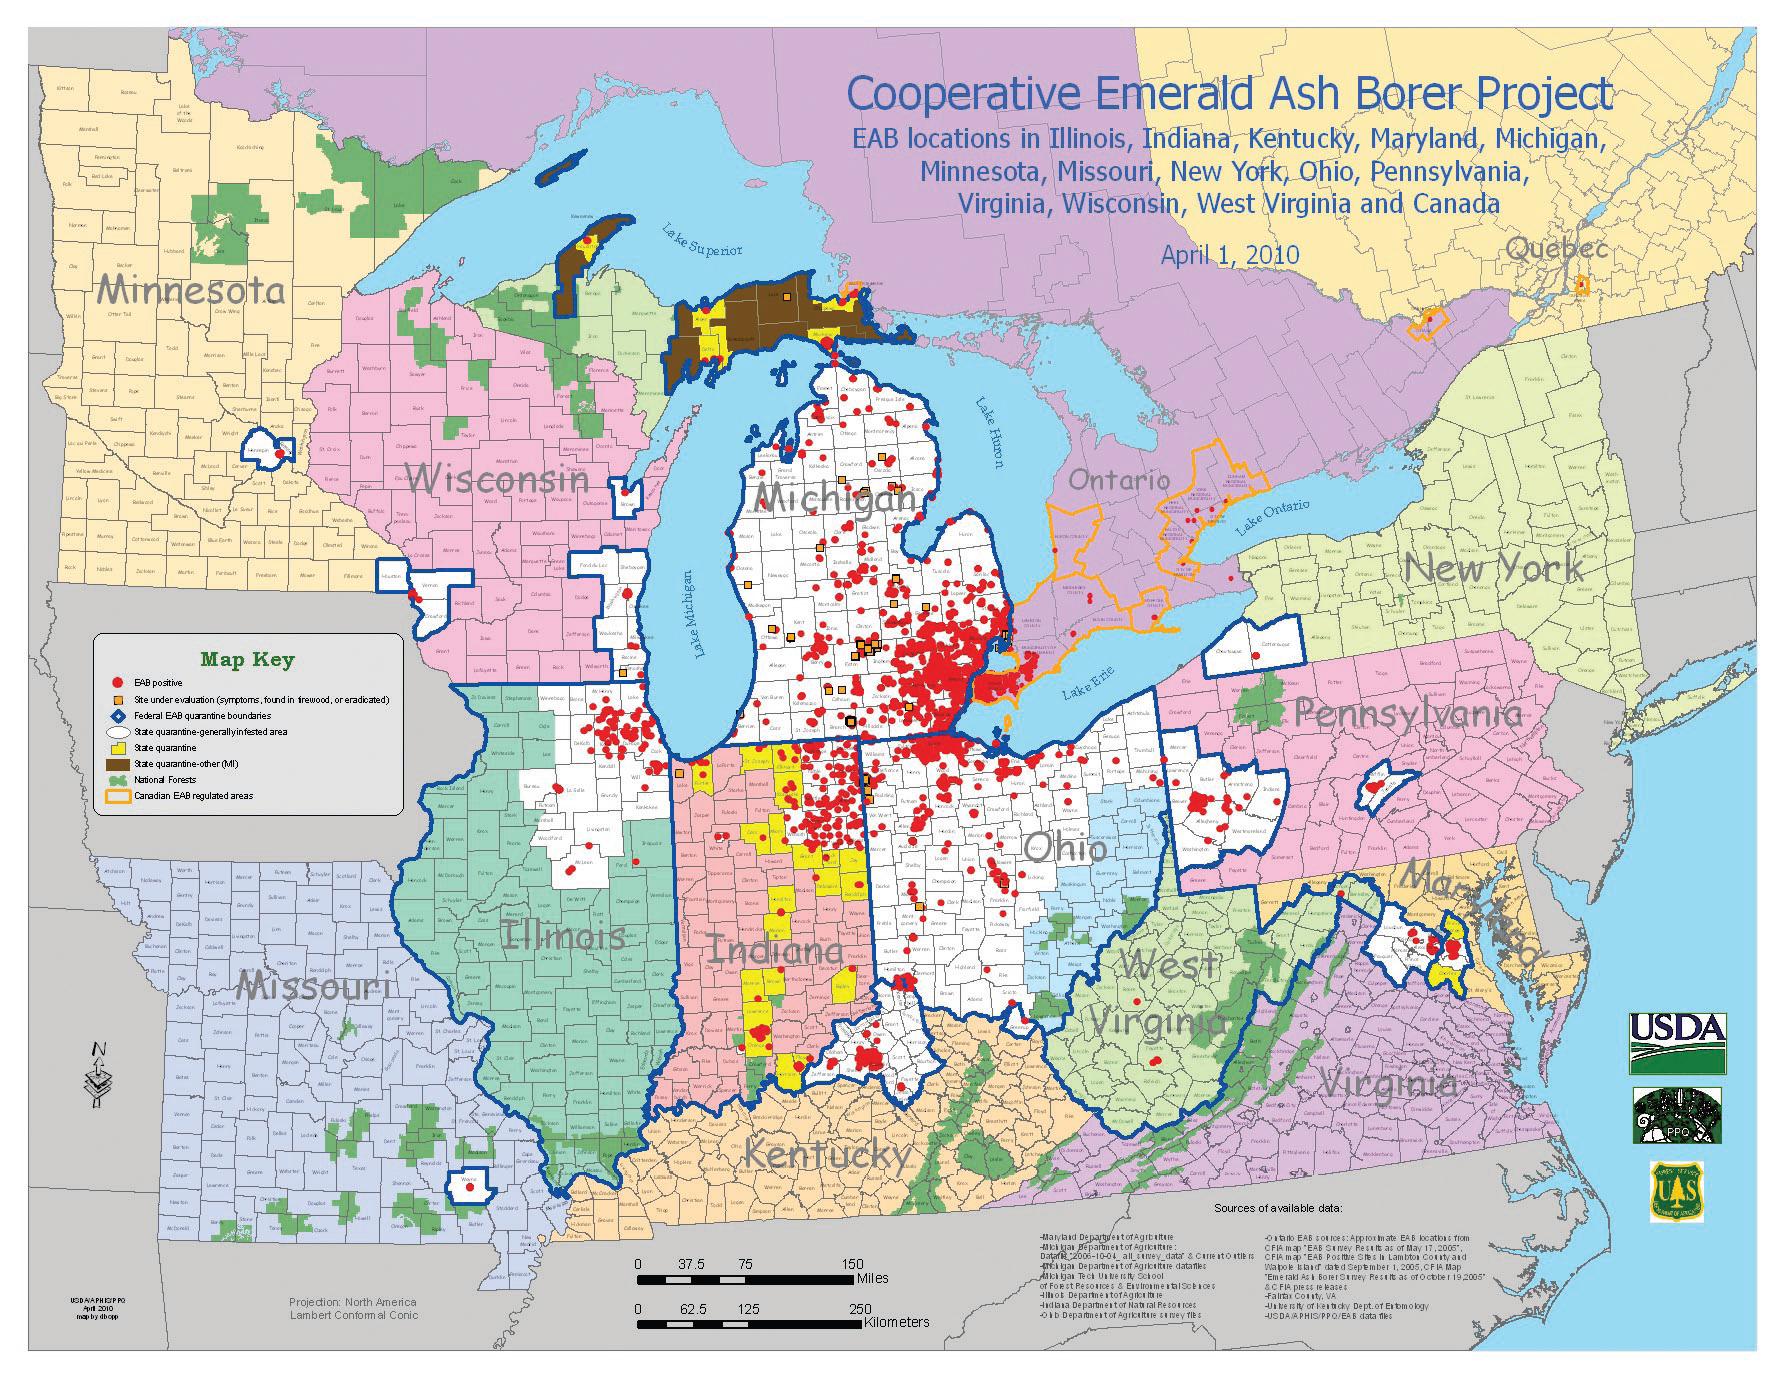 Map of Emerald Ash Borer positive locations as of April 1, 2010